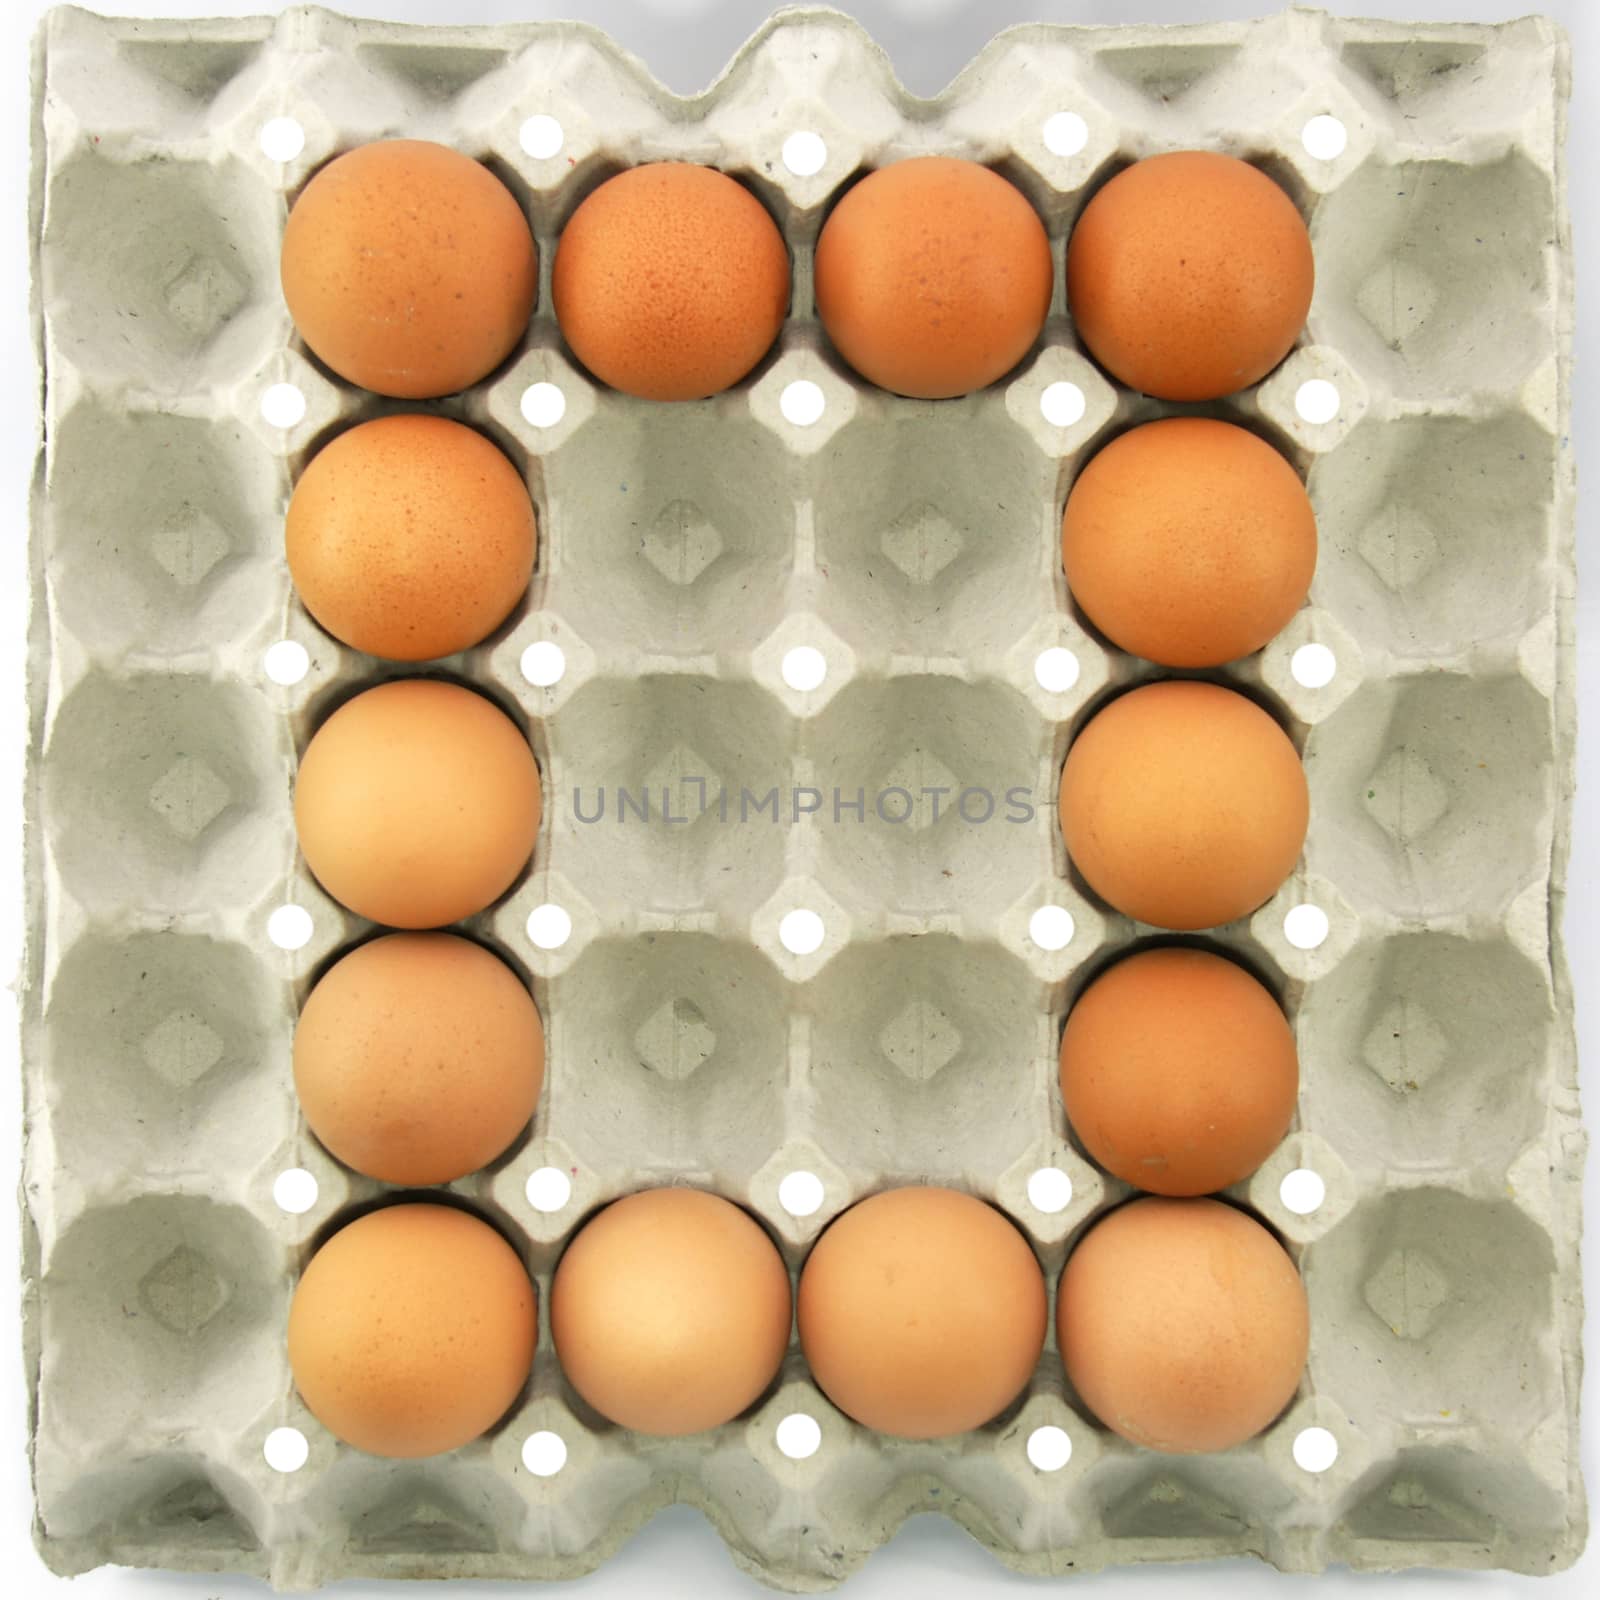 Number zero of eggs in the paper package tray